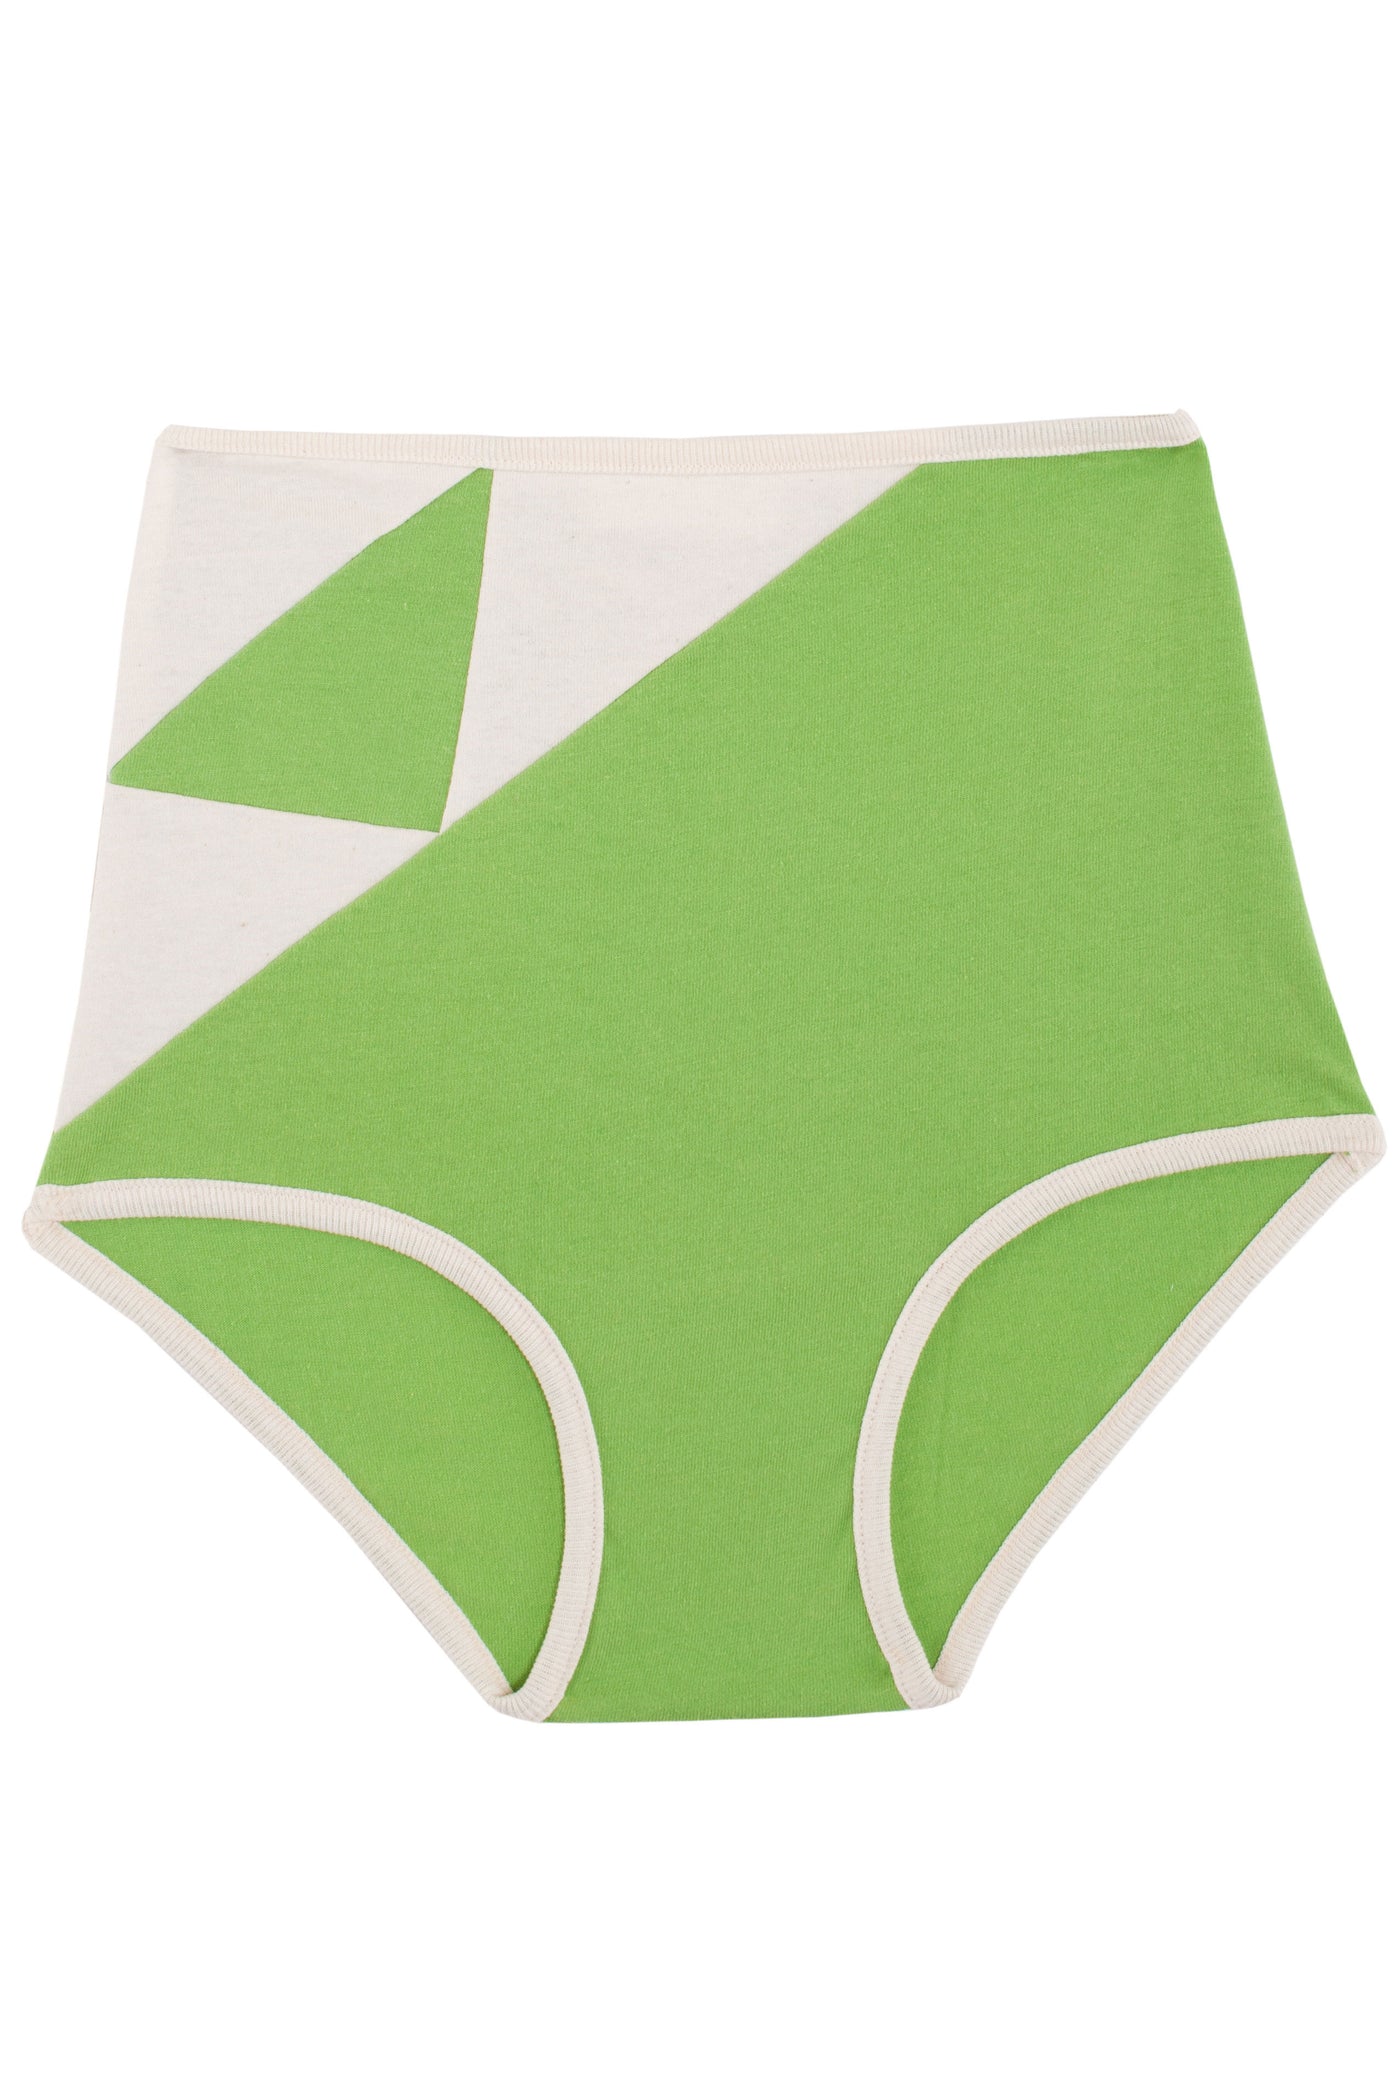 Exclusive Lime Green Birds in The Air Housepants